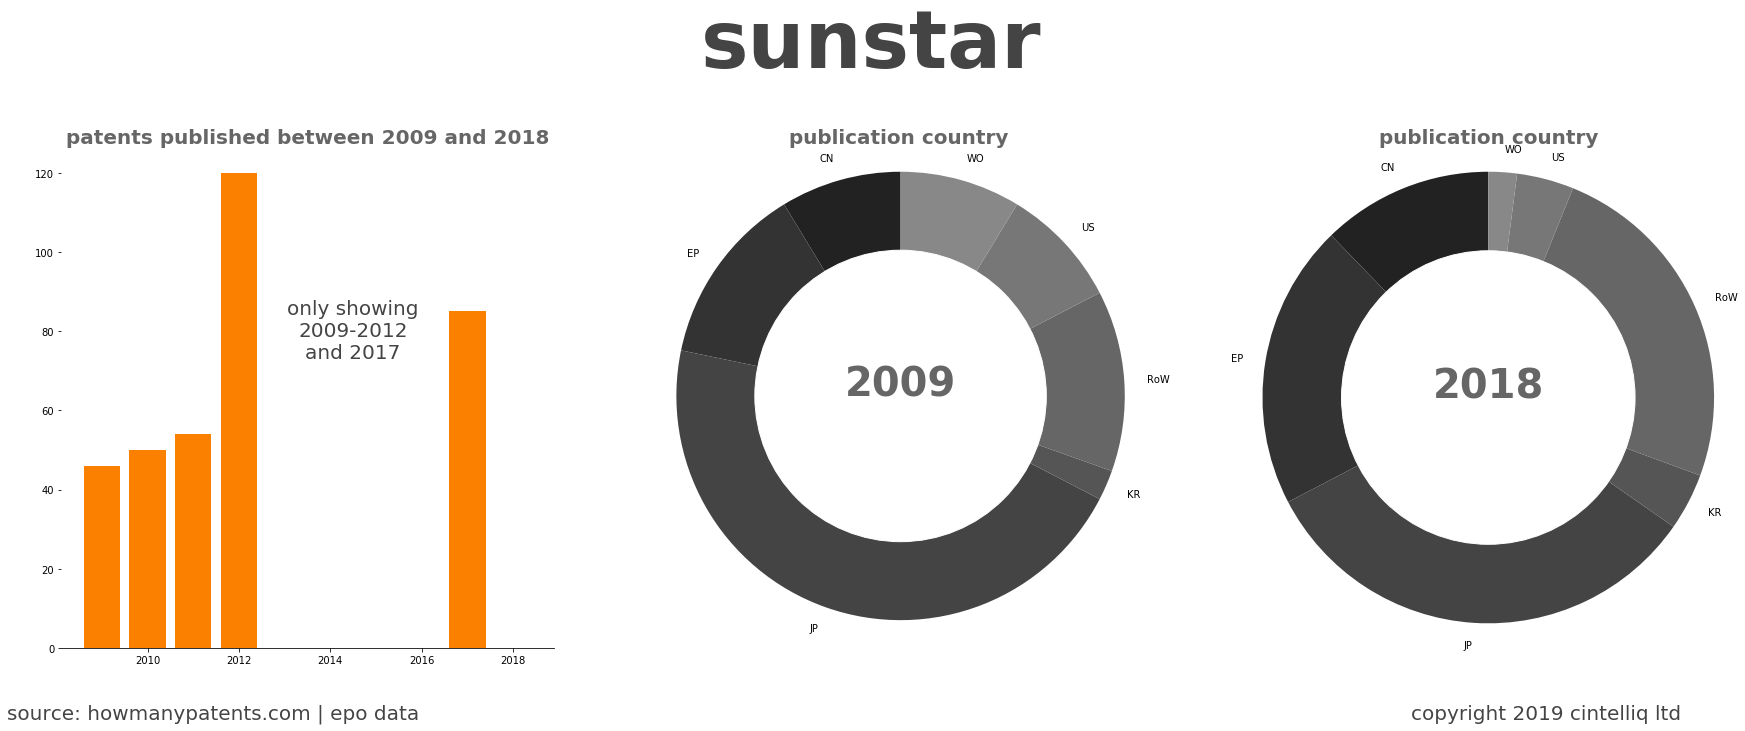 summary of patents for Sunstar